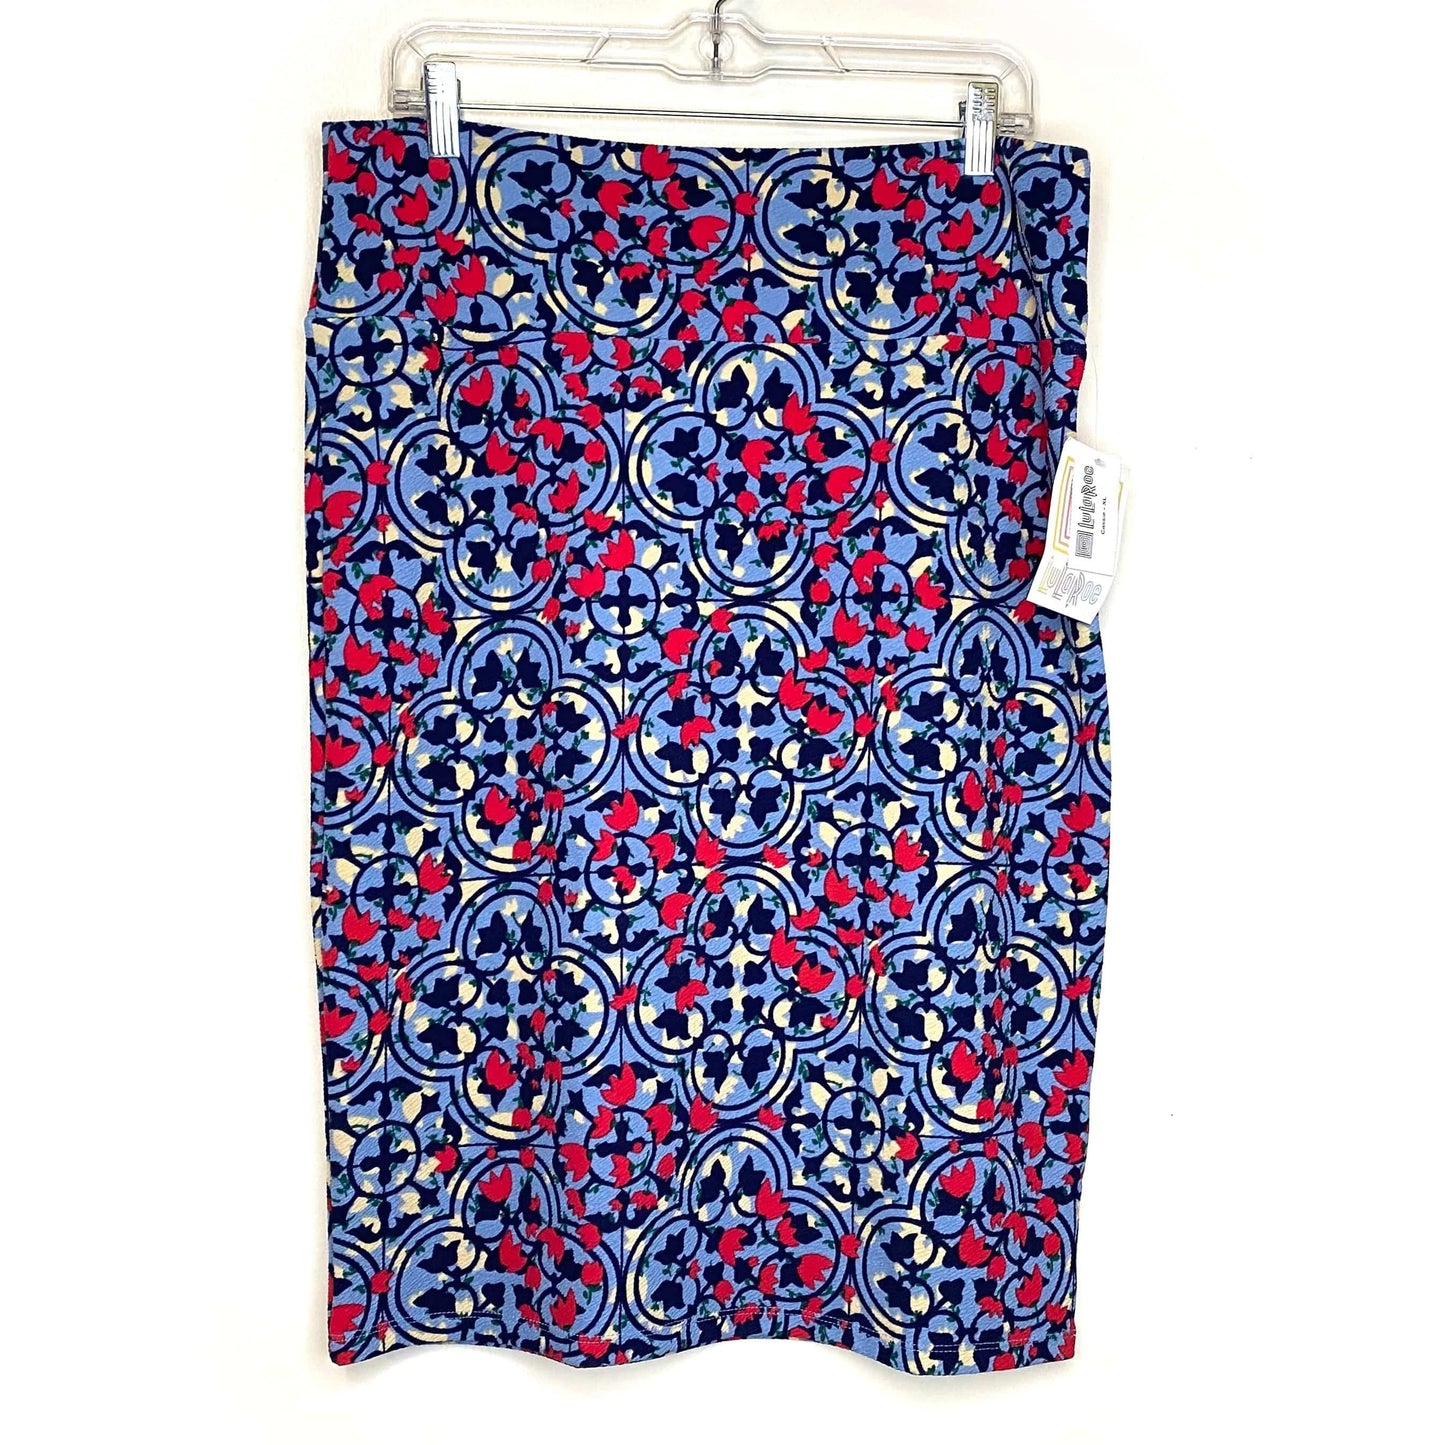 LuLaRoe Womens XL Red/White/Blue Cassie Floral Skirt NWT